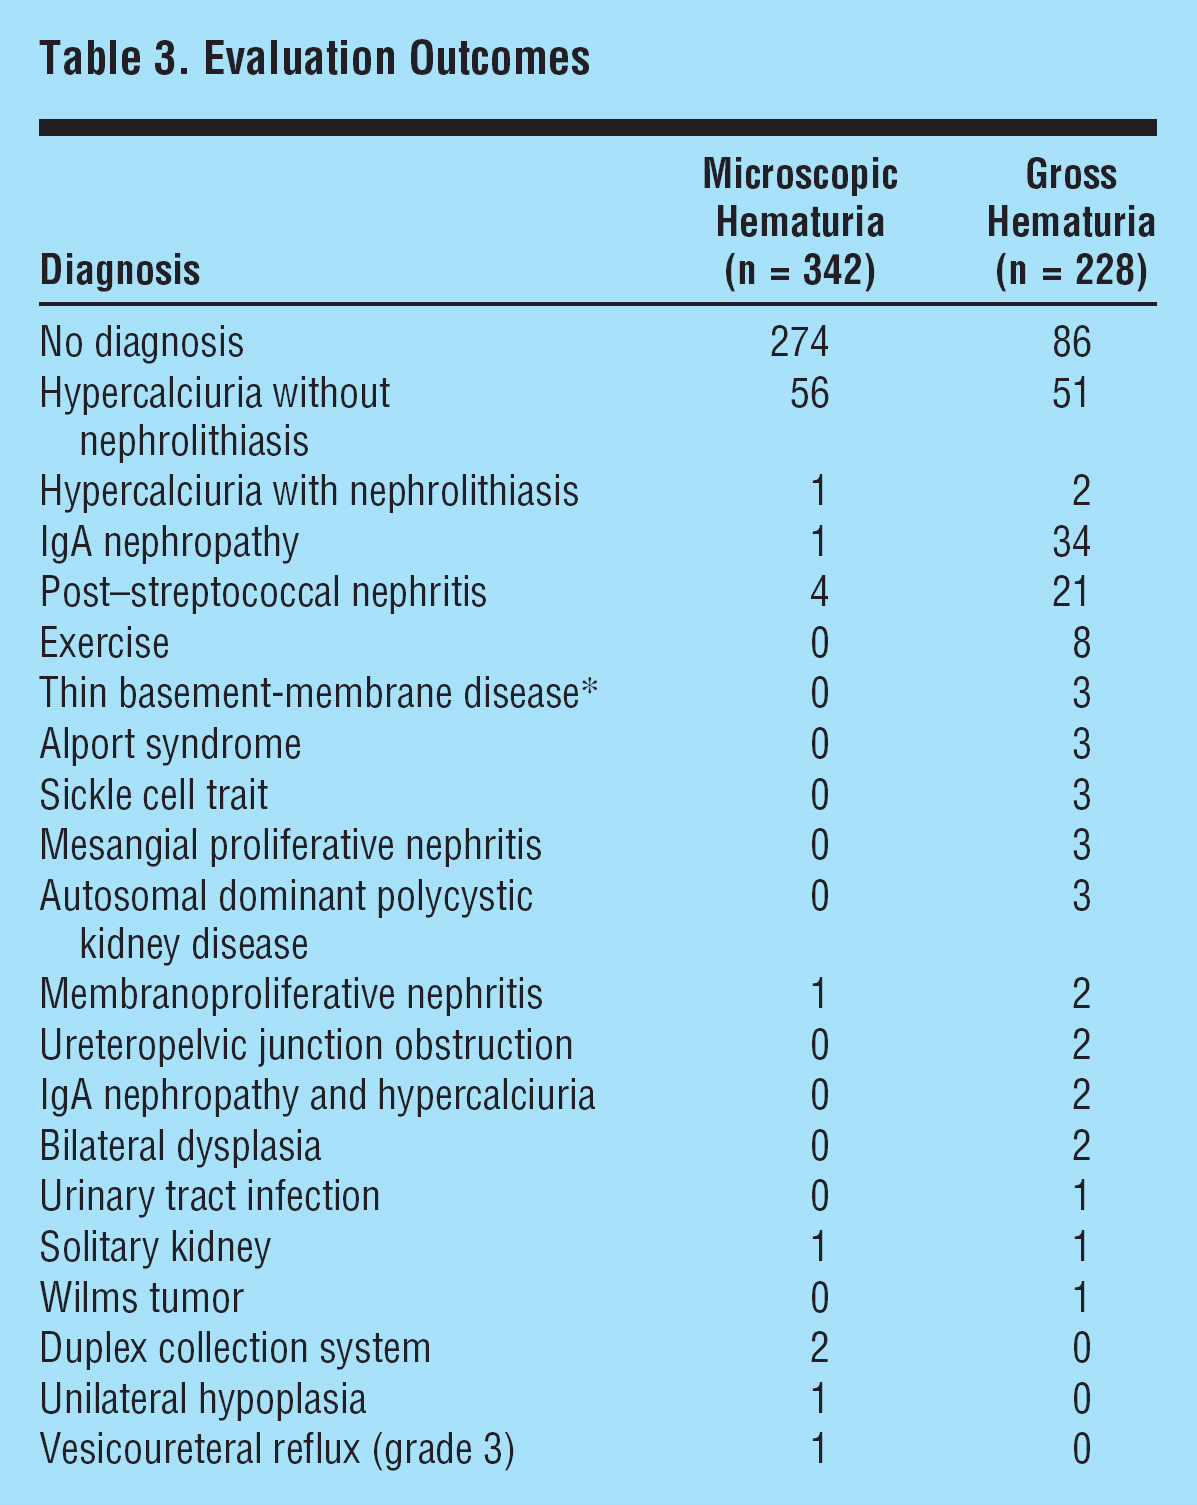 The Clinical Significance of Asymptomatic Gross and Microscopic Hematuria in